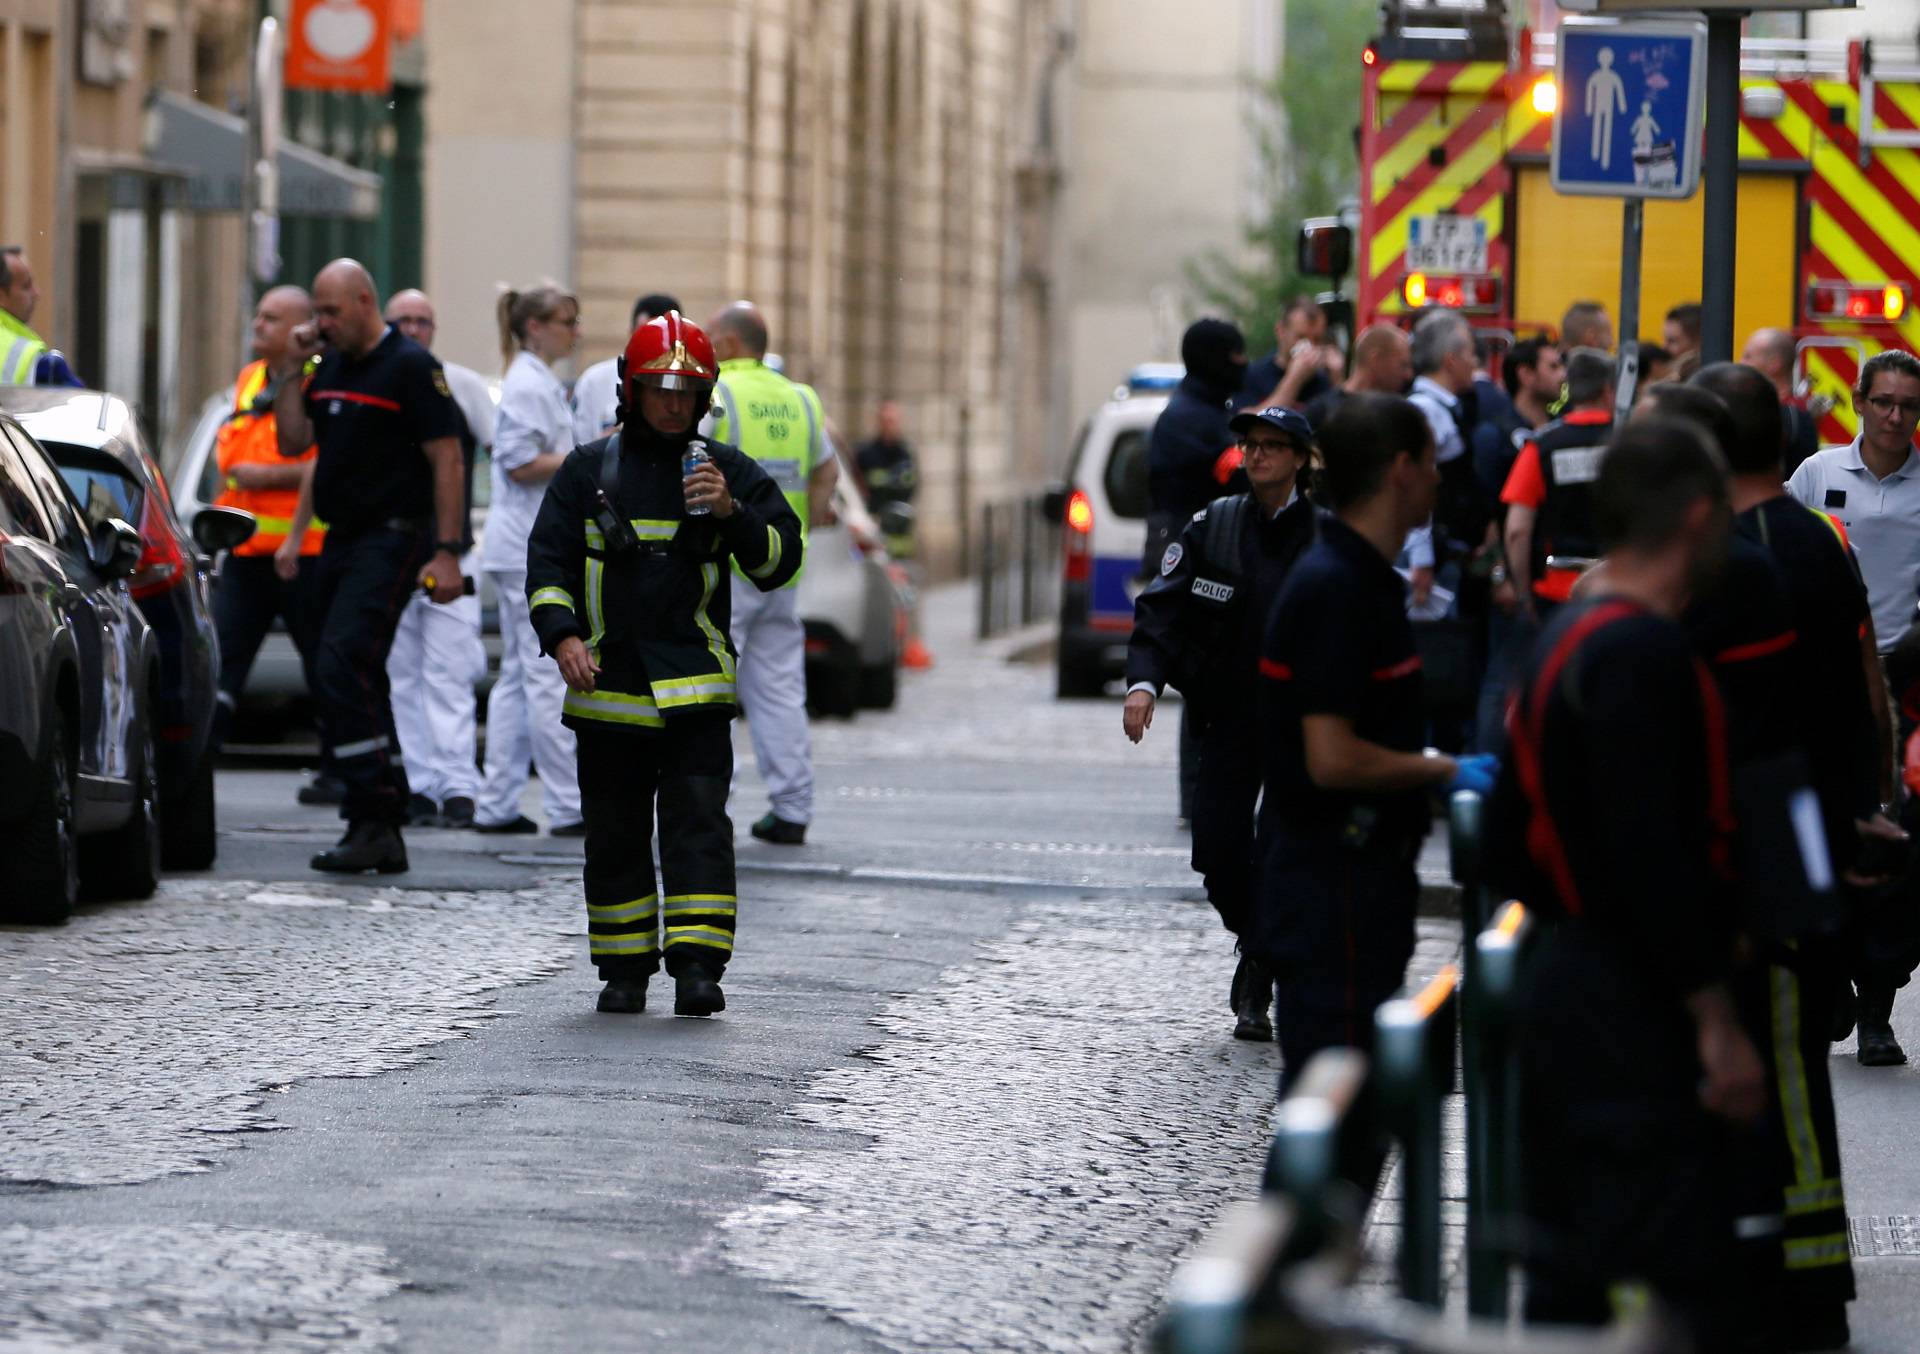 Fire fighters and medics are seen near the site of a suspected bomb attack in central Lyon